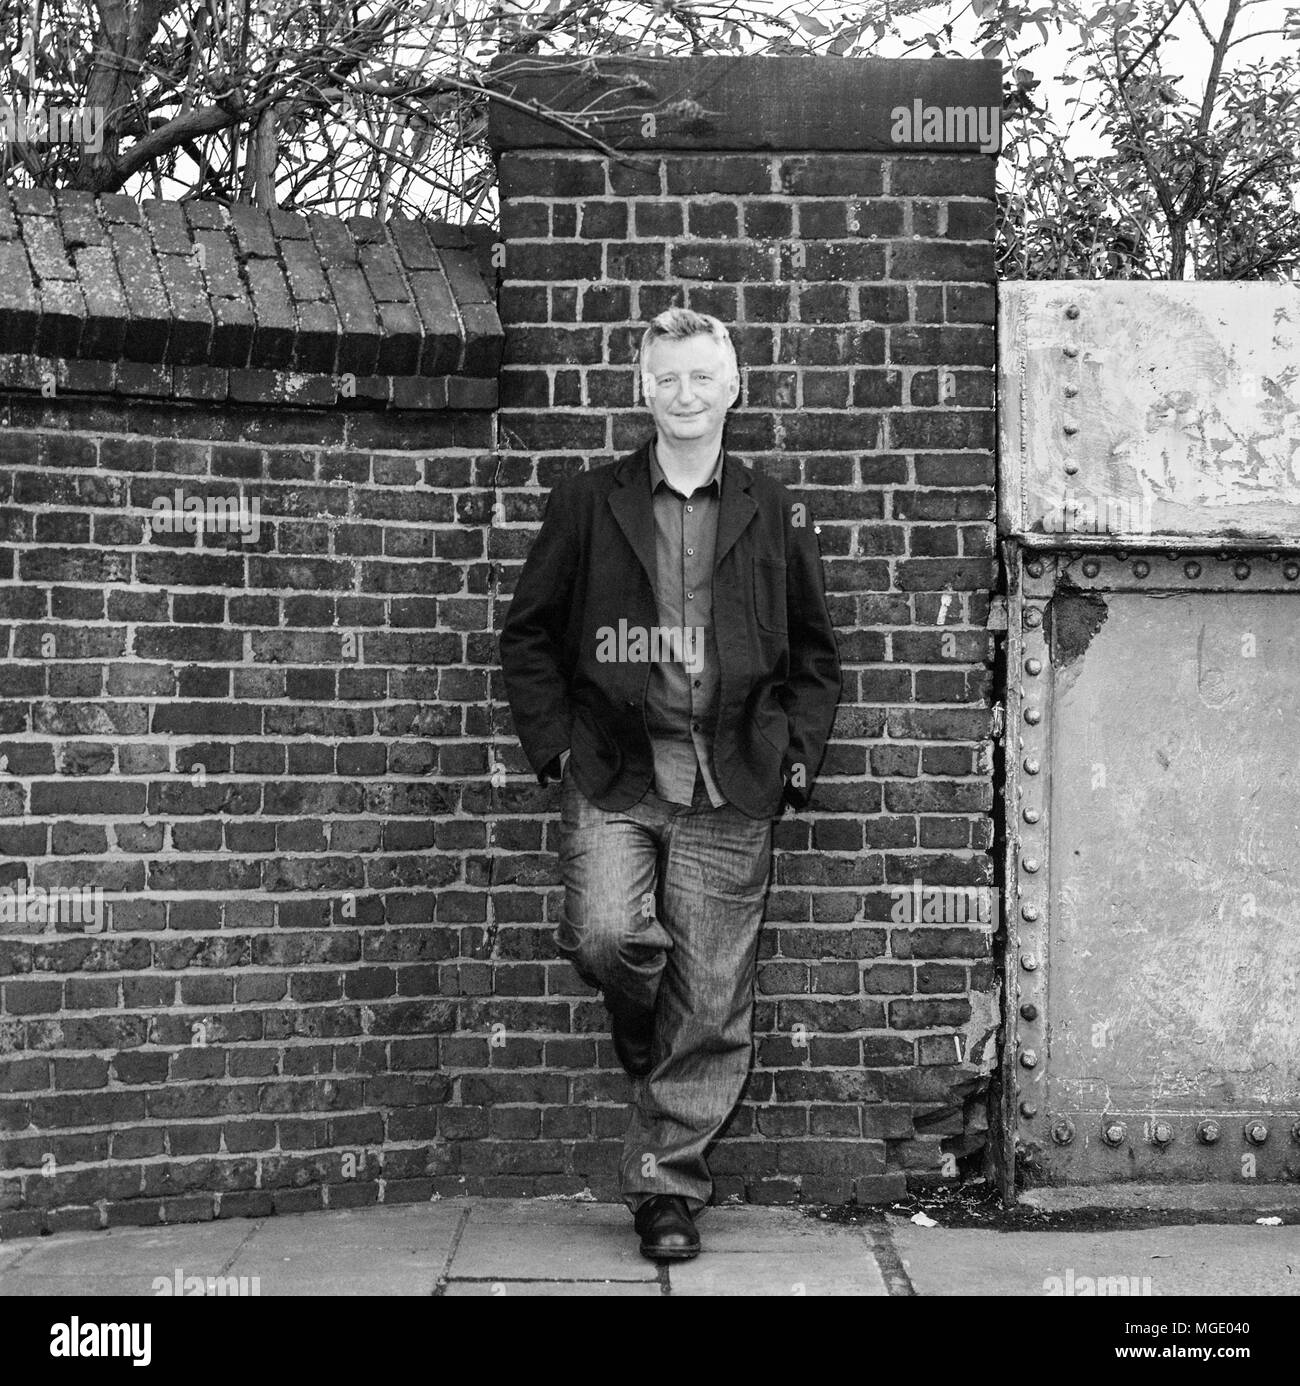 Billy Bragg, English singer-songwriter and left-wing activist photographed in West London, England, United Kingdom. Stock Photo